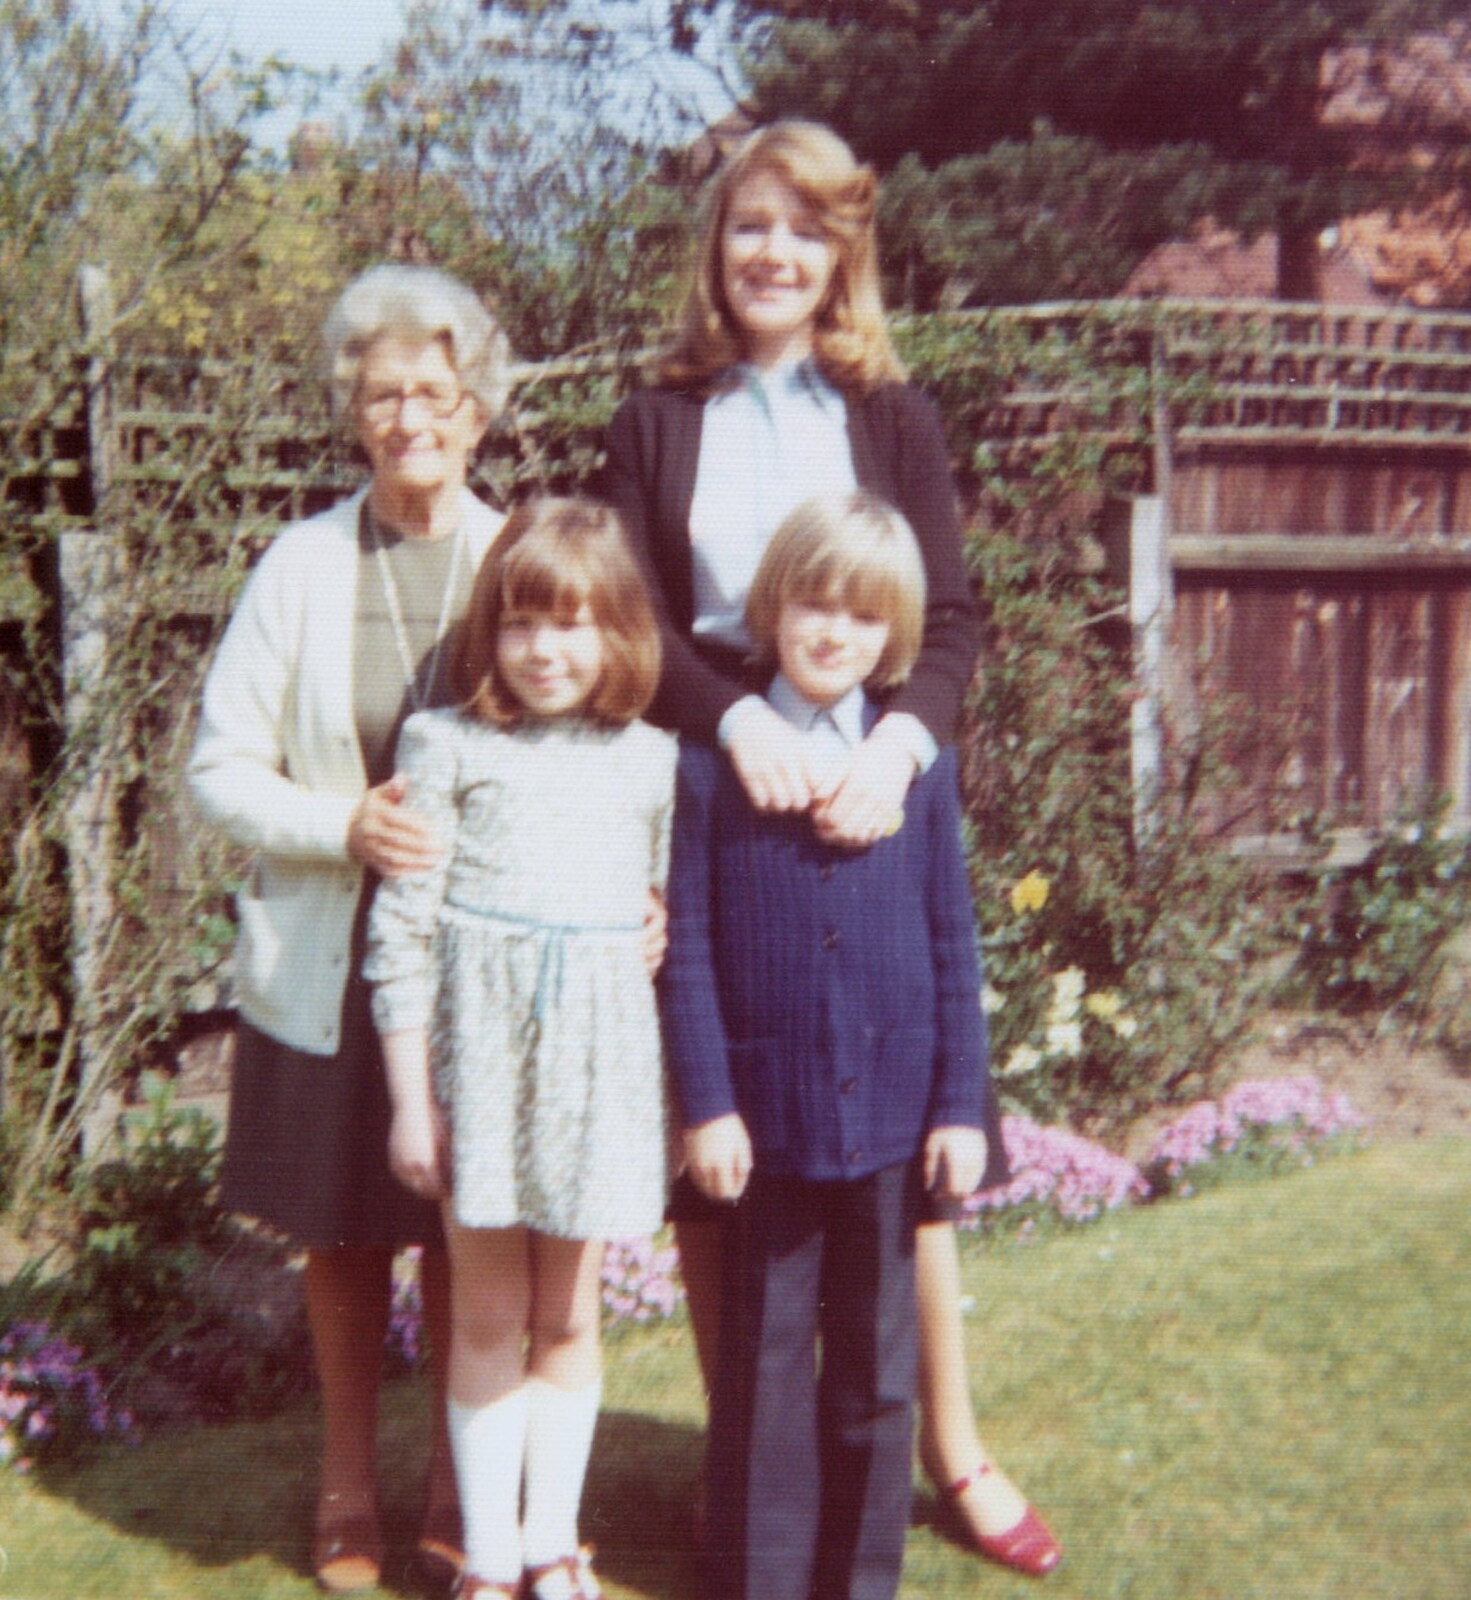 Family History: Danesbury Avenue, Tuckton, Christchurch, Dorset - 24th January 2020: Granny, Mother, Sis and Nosher